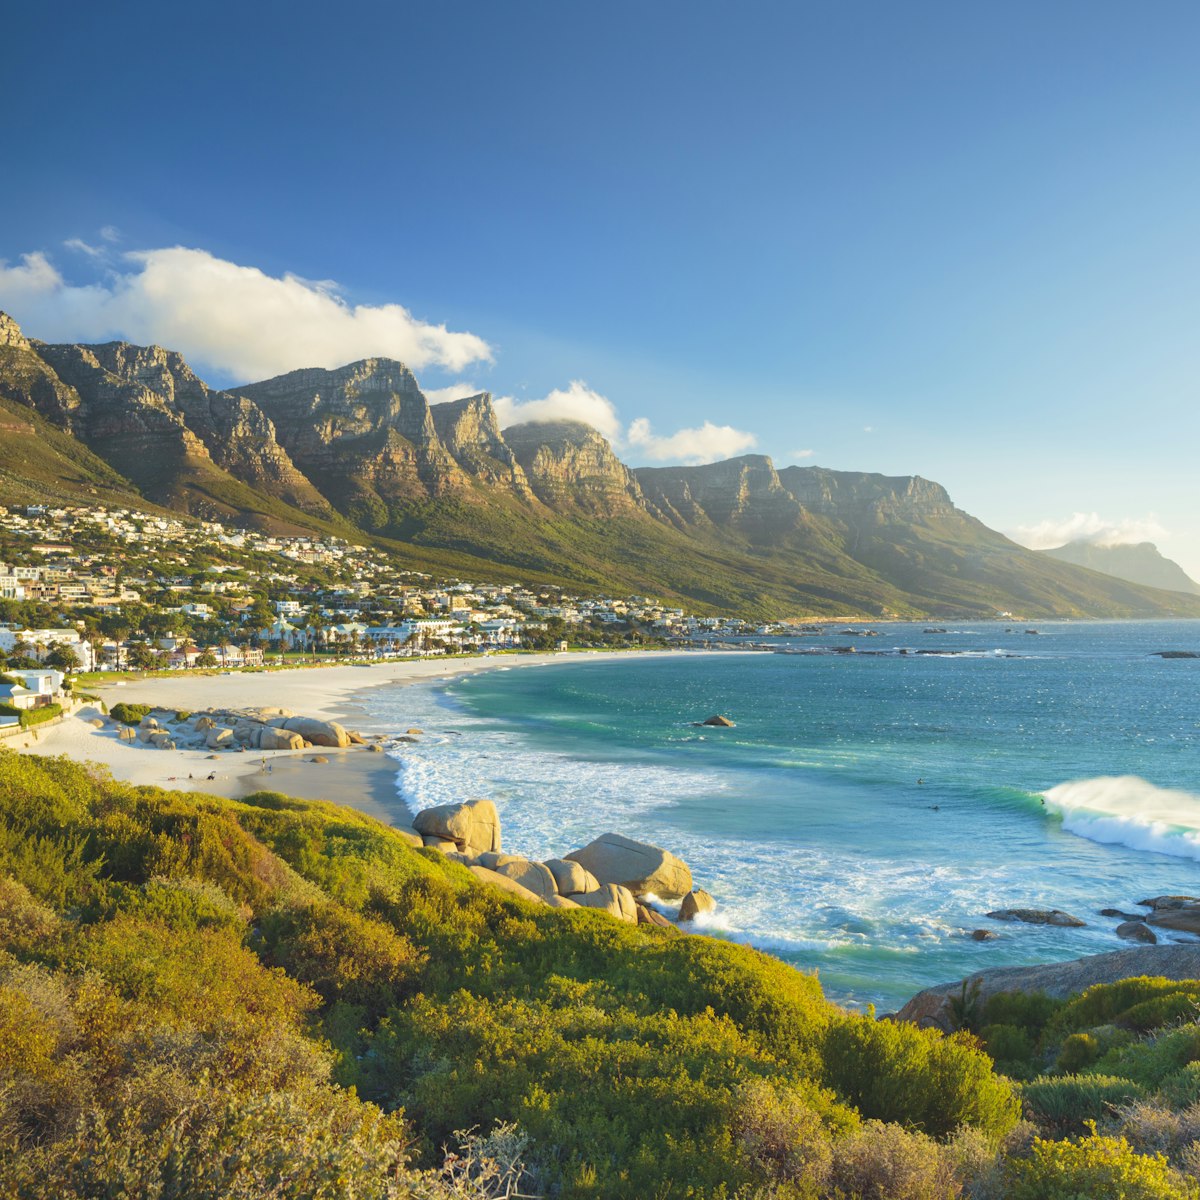 View of the beach and Twelve Apostles mountain in Camps Bay near Cape Town in South Africa.